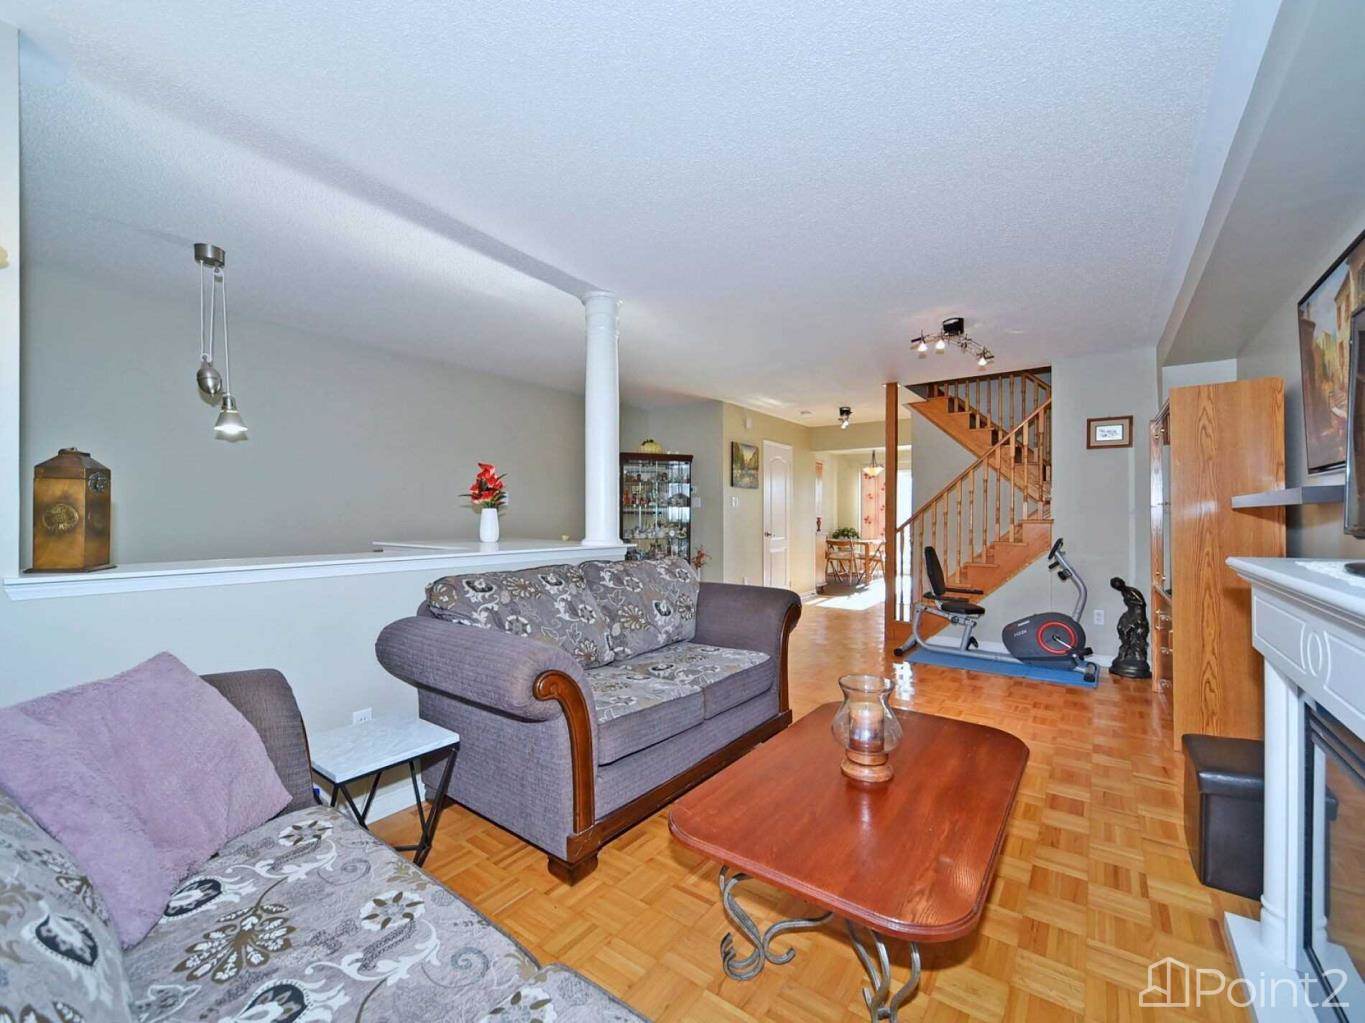 19 Foxchase Ave Vaughan Ontario L 4 L 9 N 1, Vaughan, ON L4L9N1 Photo 6